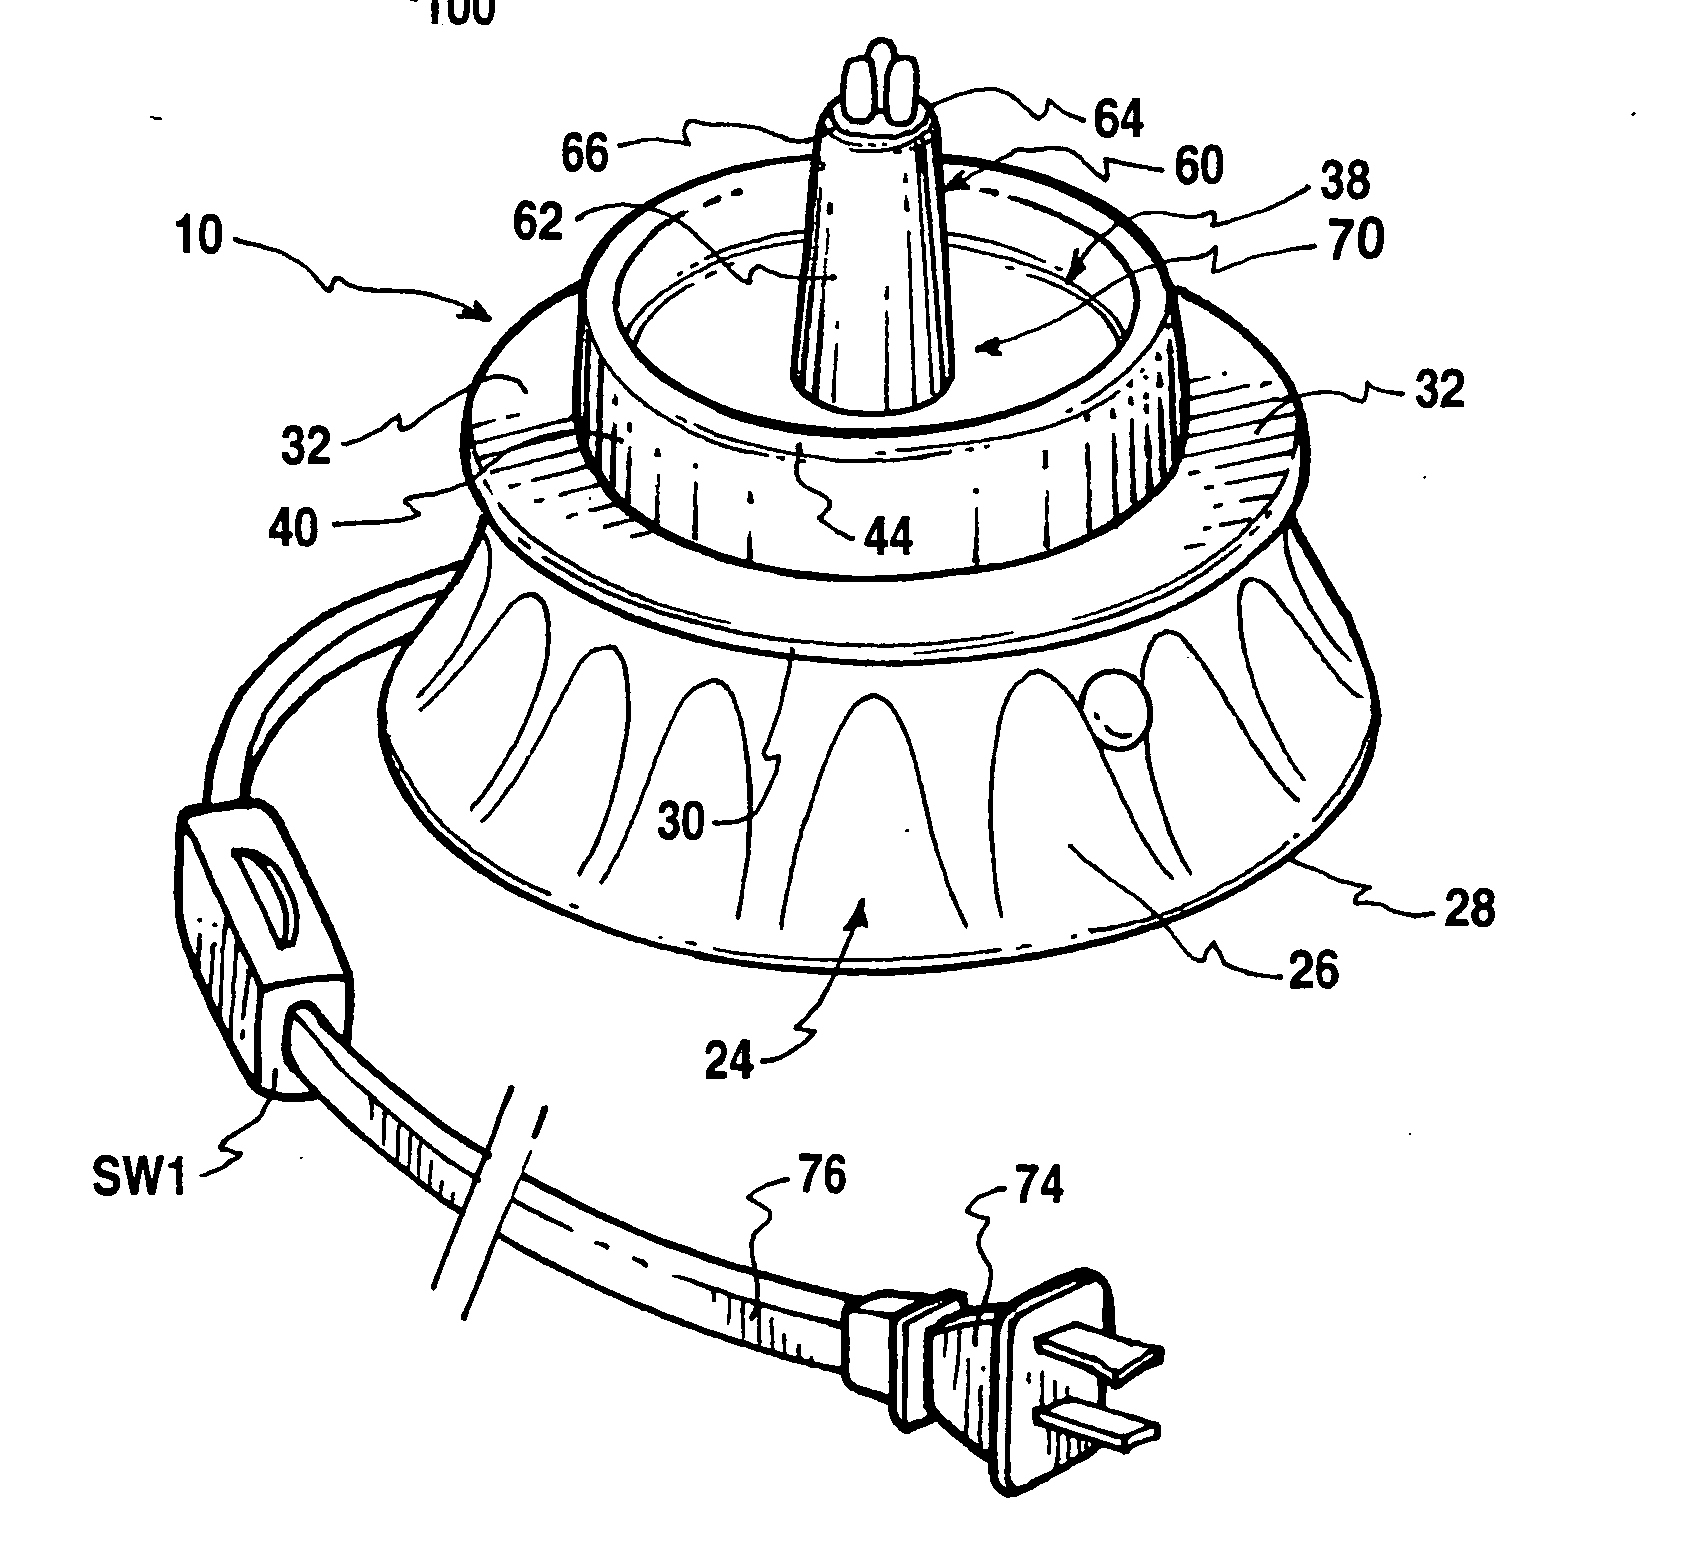 Flameless fragrance warming apparatus and methods